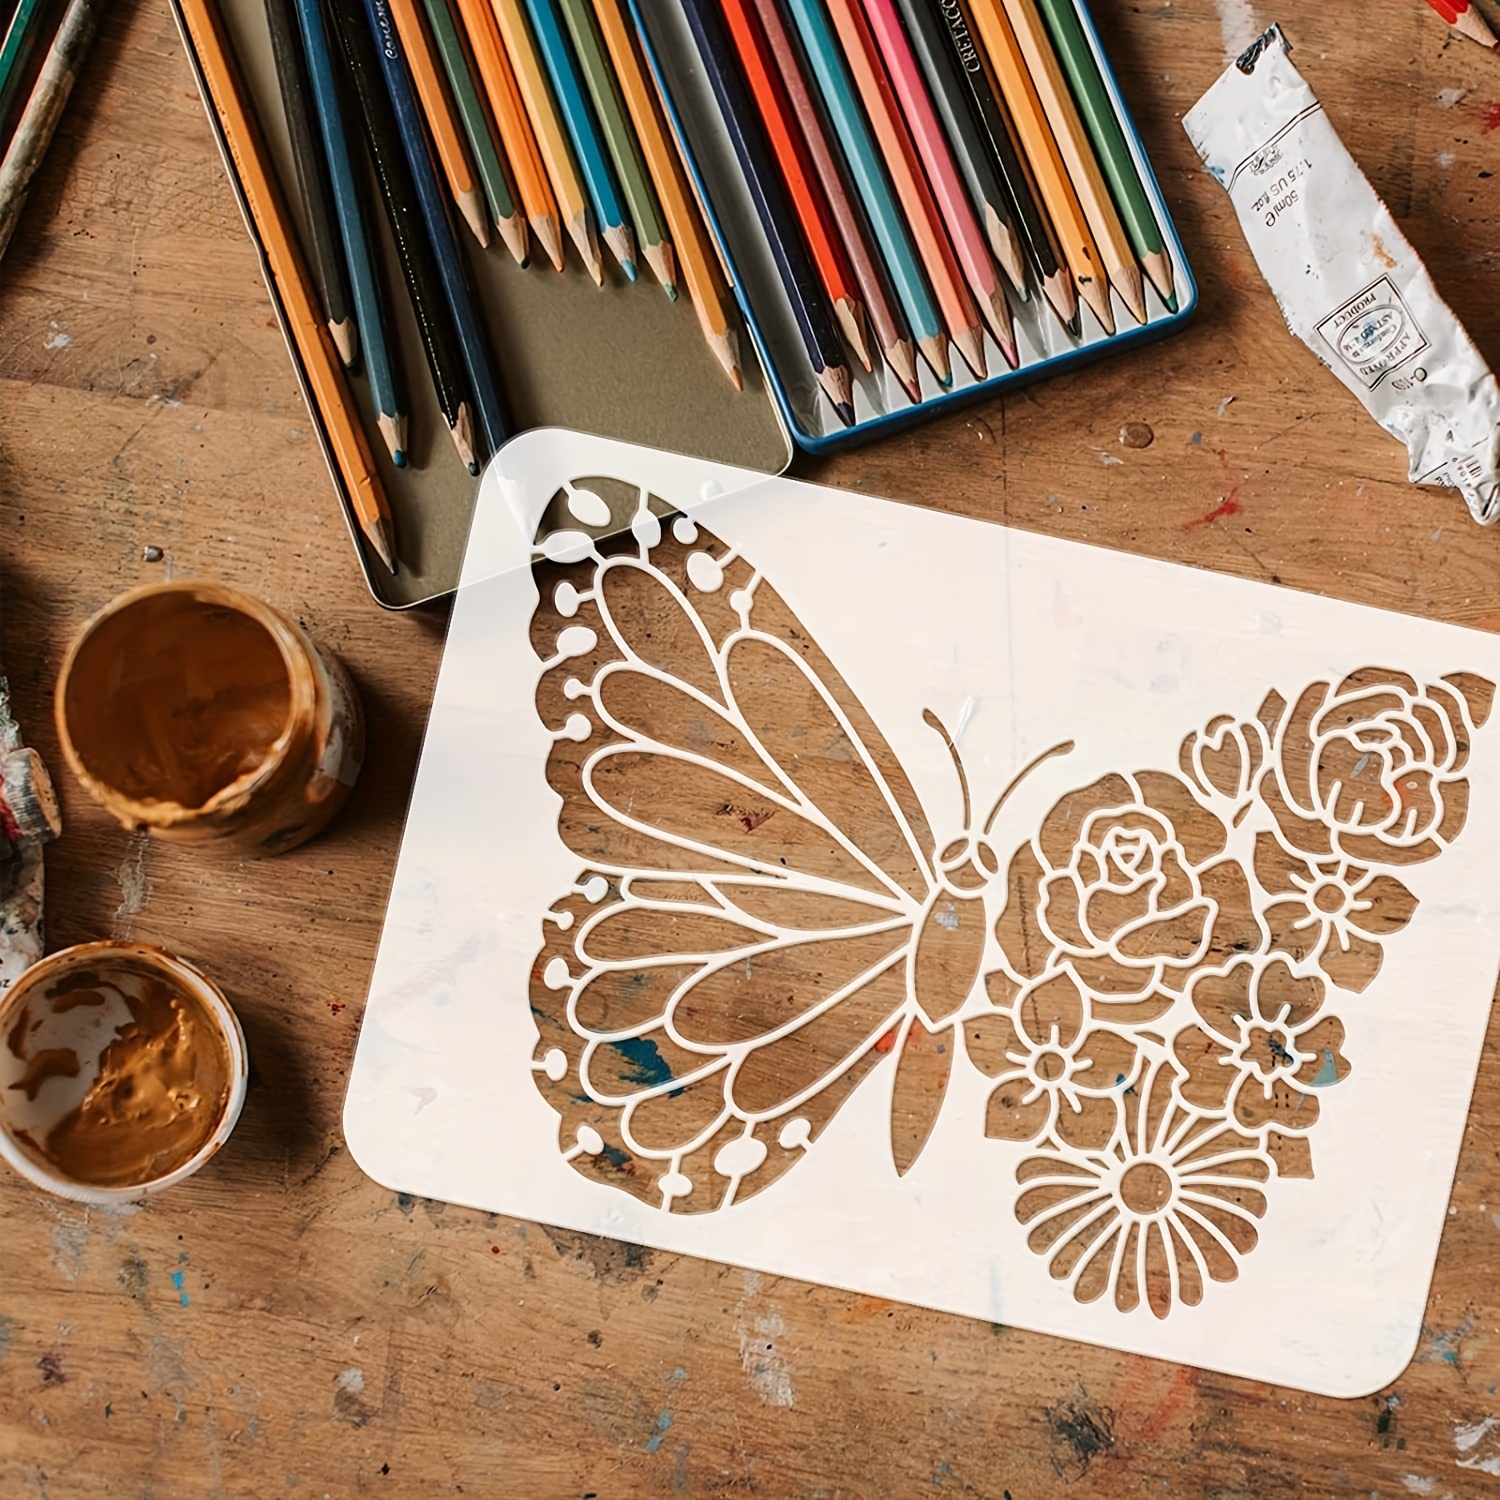 50 PCS Flower Painting Stencils Reusable Flower Stencils for Painting on  Wood Rocks Canvas Fabric Glass Pottery 4x4 Inch